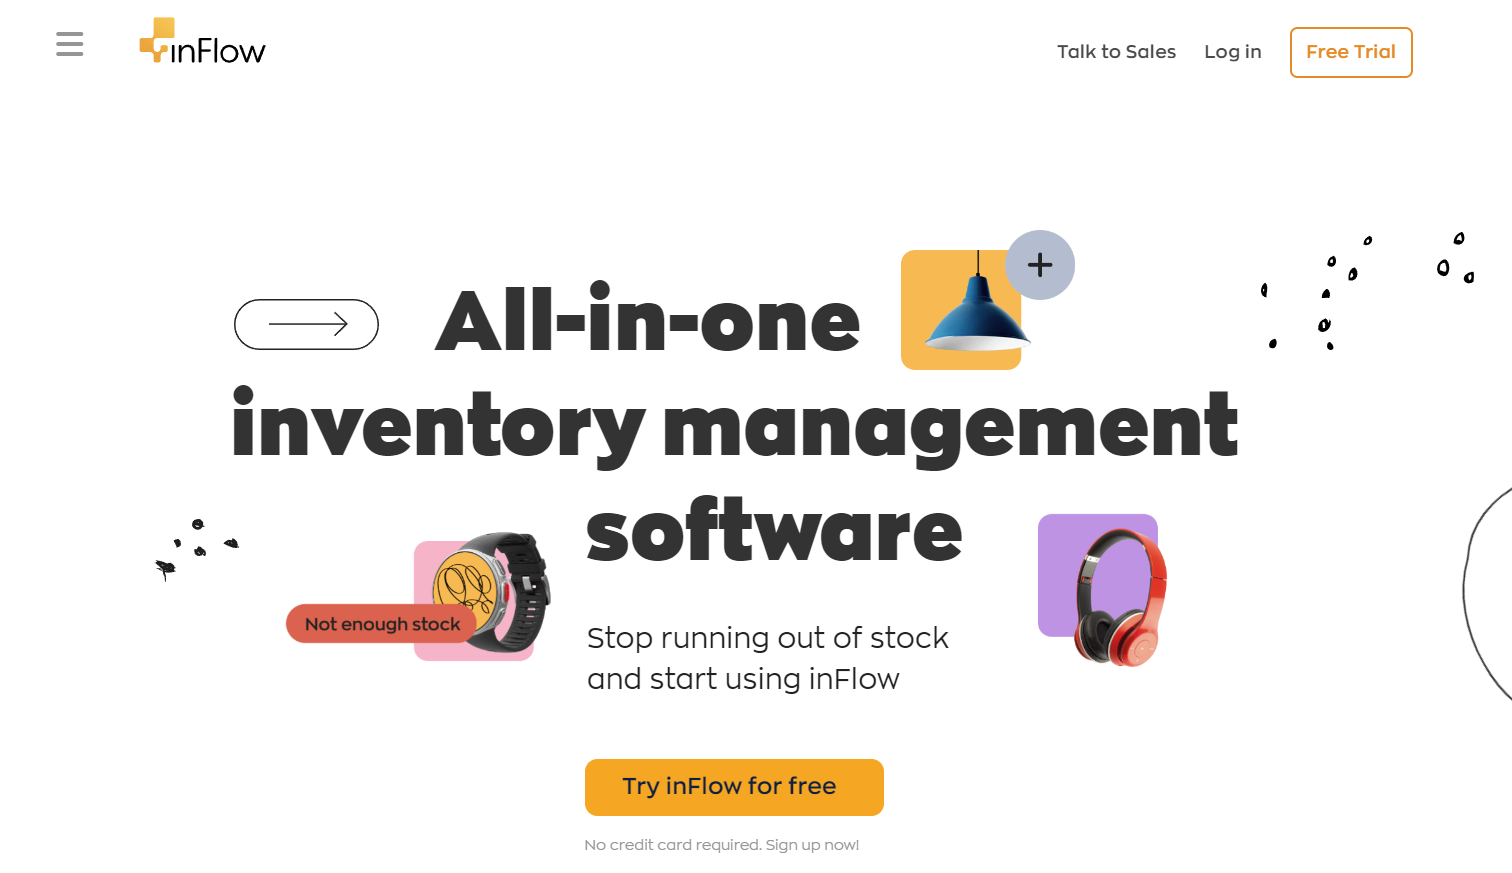 inflow inventory management software